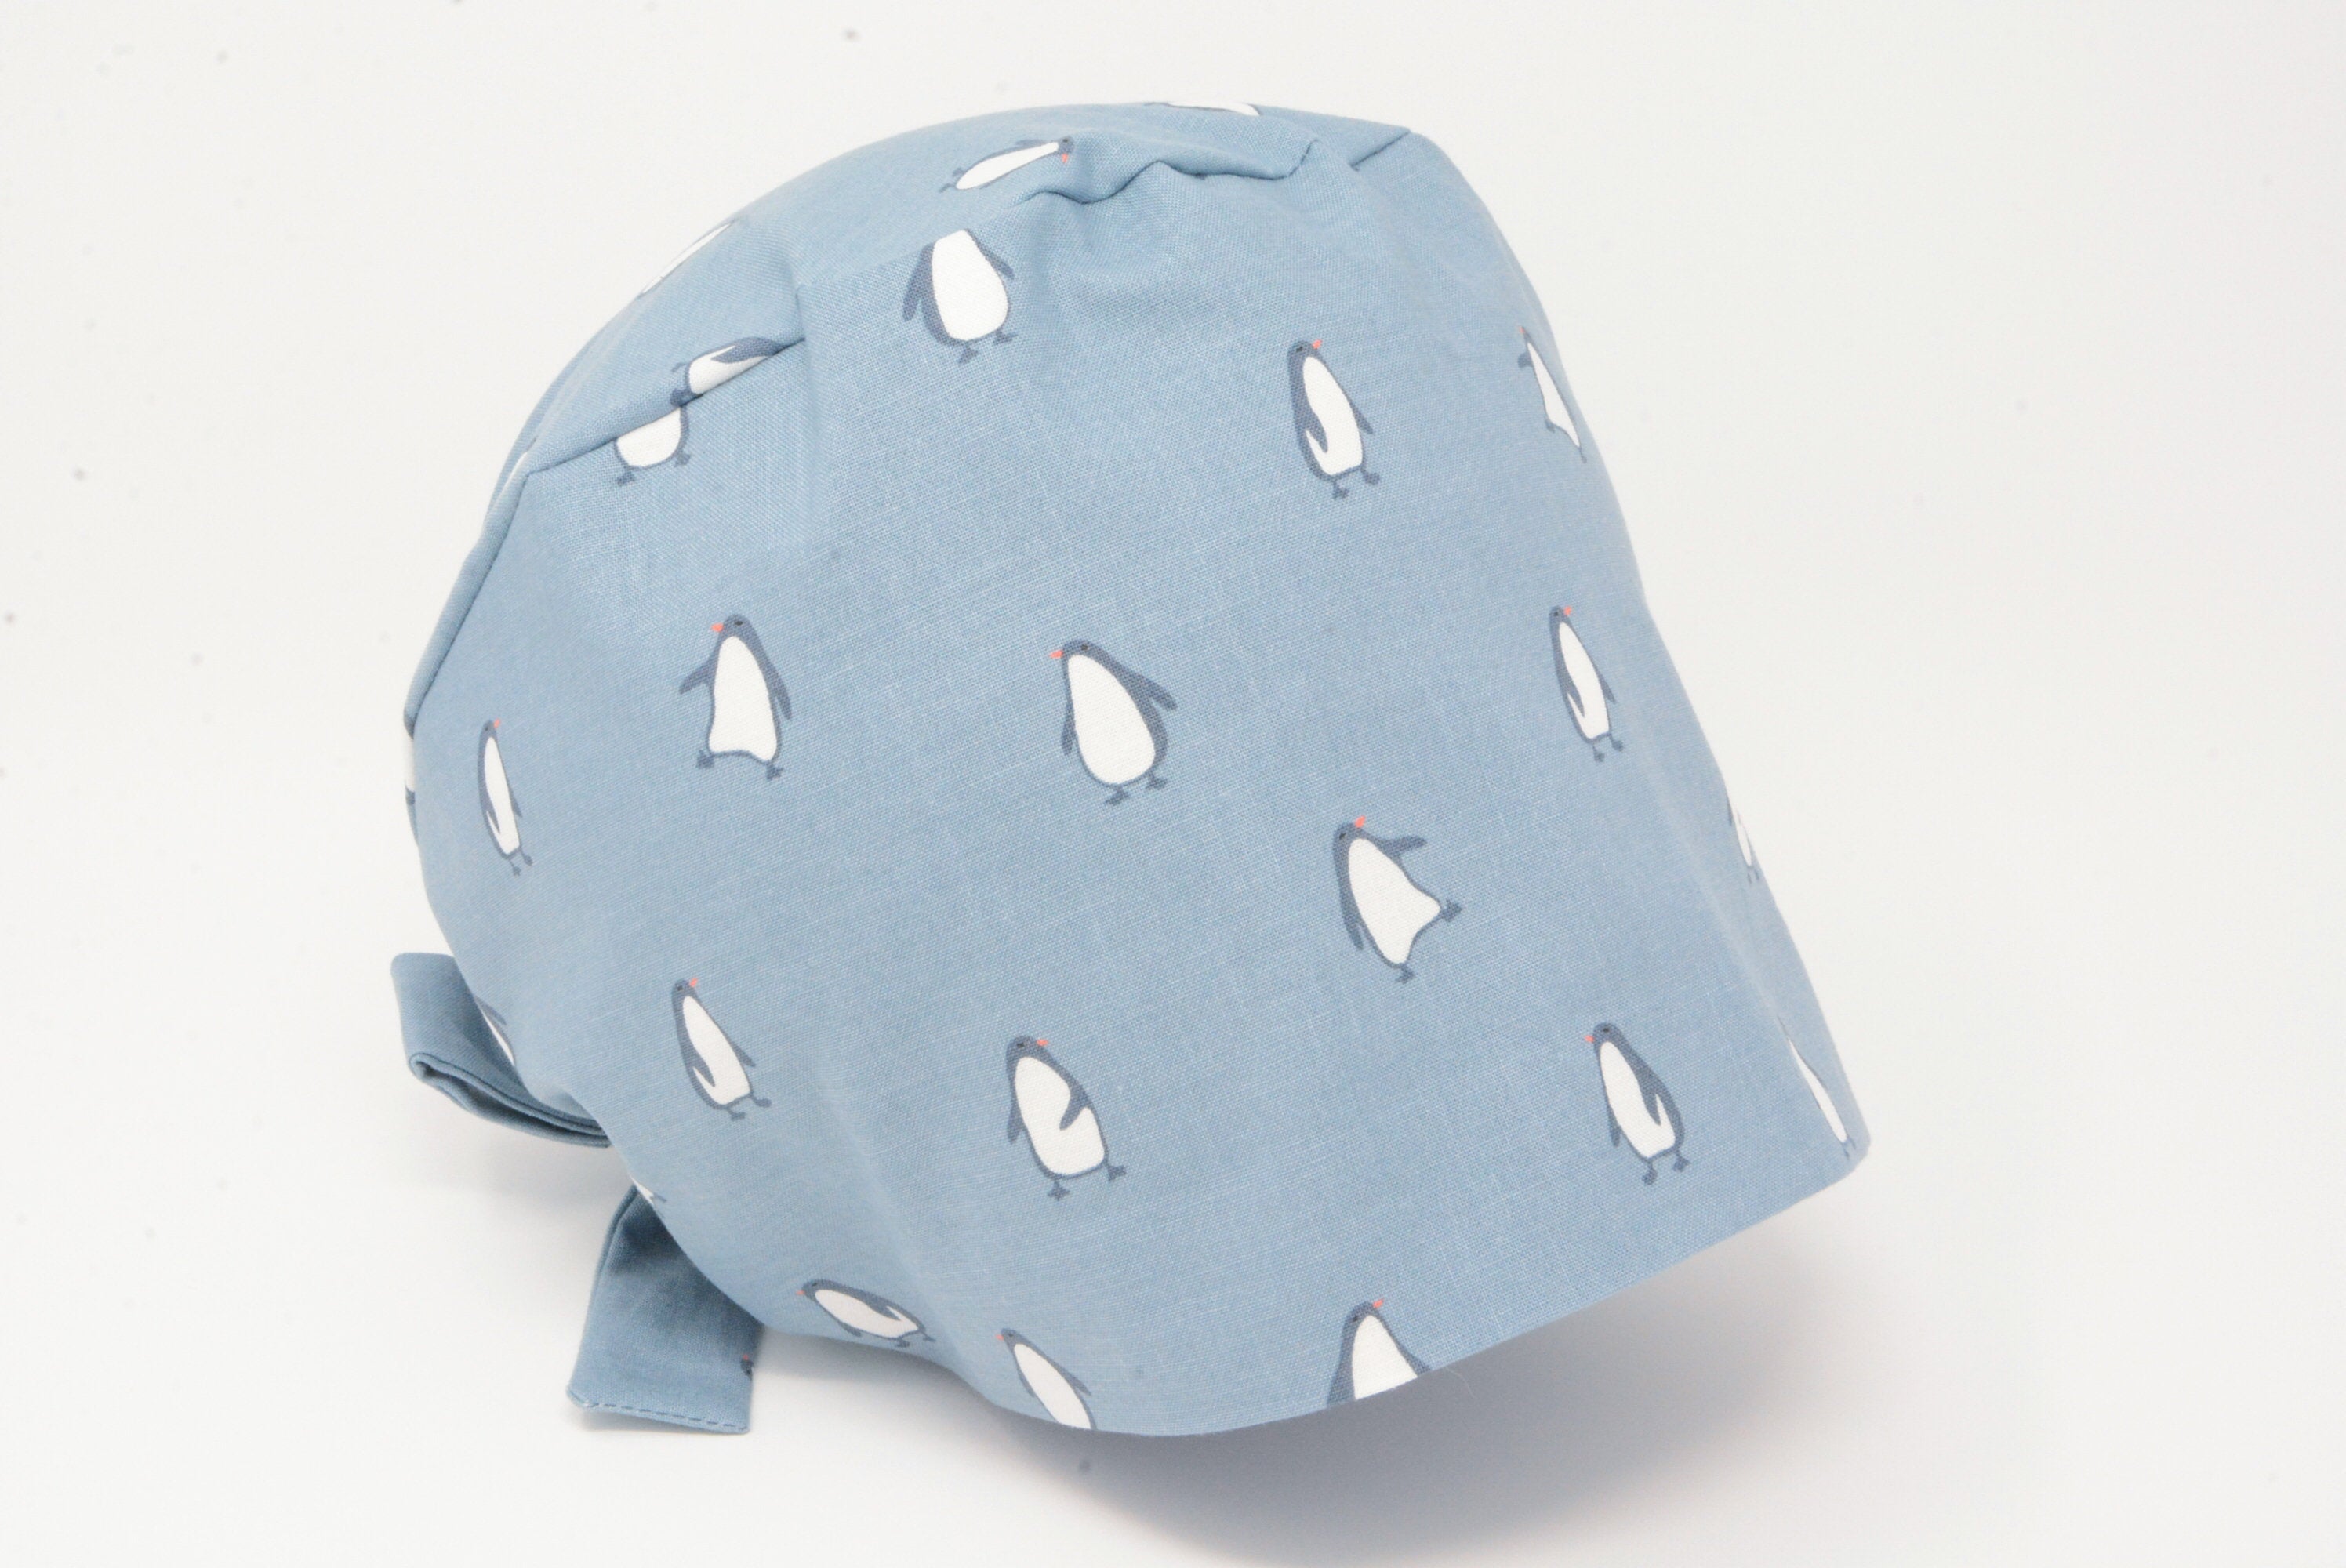 Penguins on Muted Blue - Cute Animal Pixie for Women